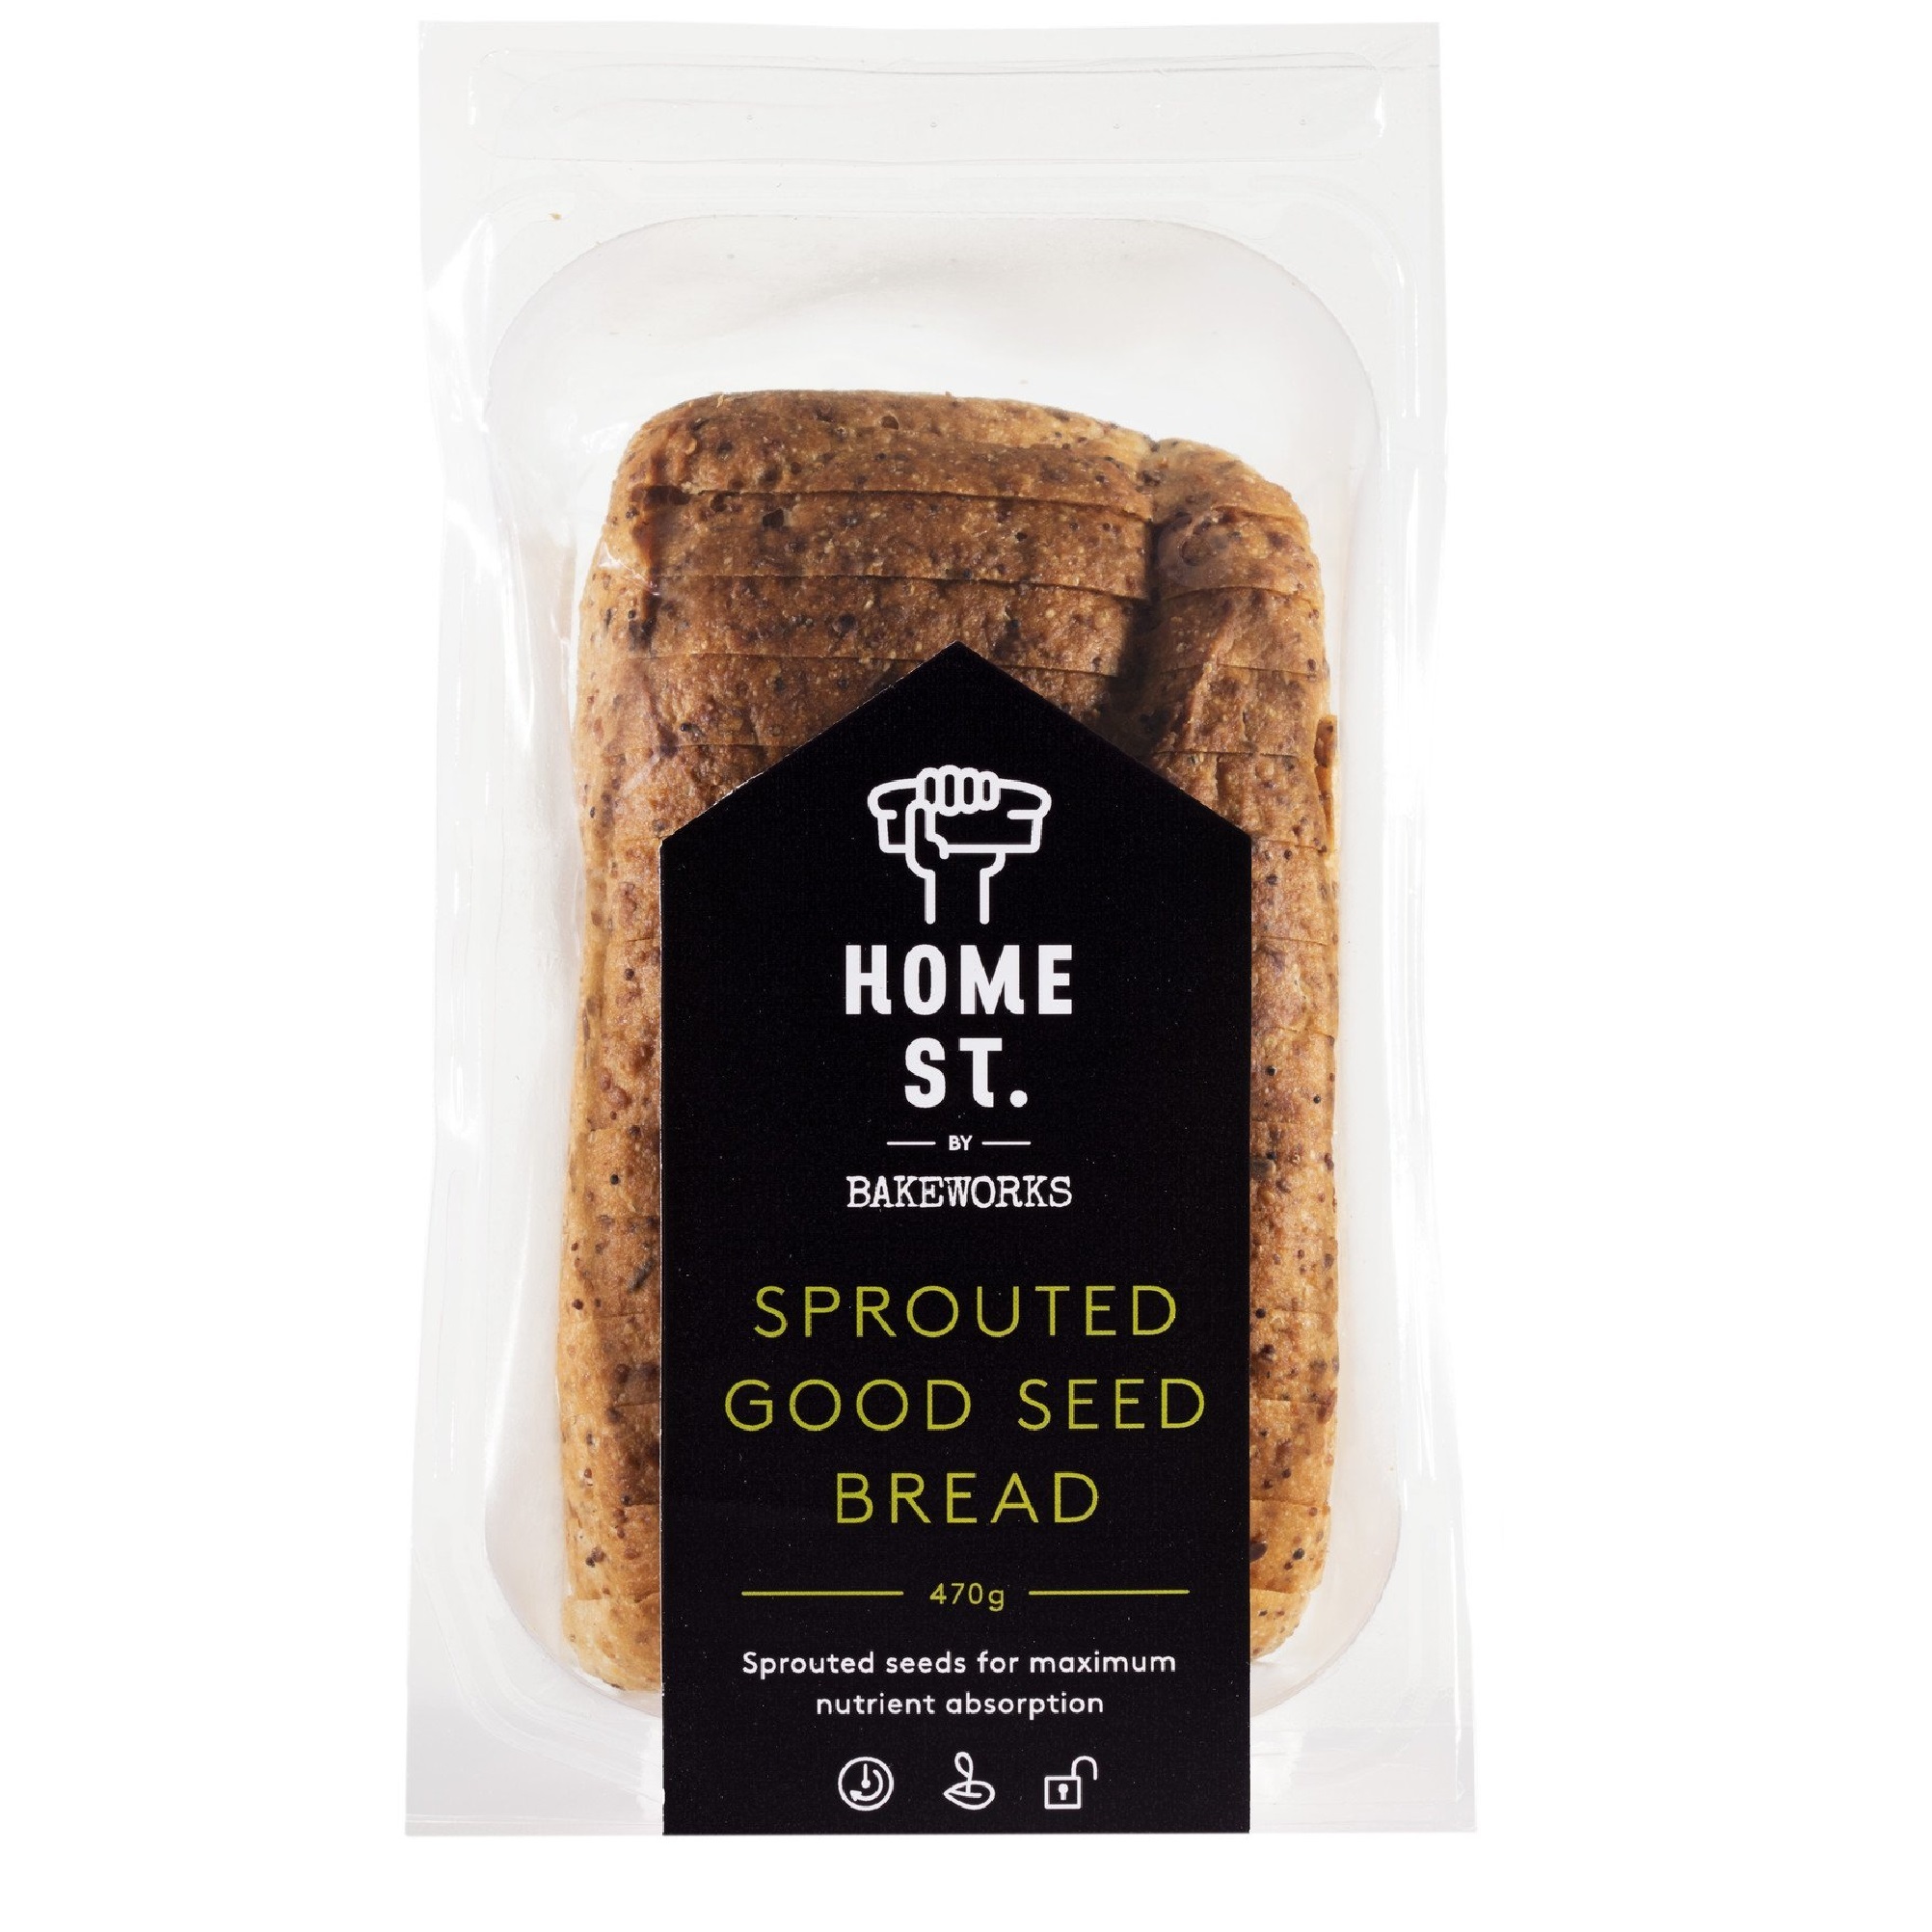 NZ Home St. GF Sprouted Good Seed Bread 470g*